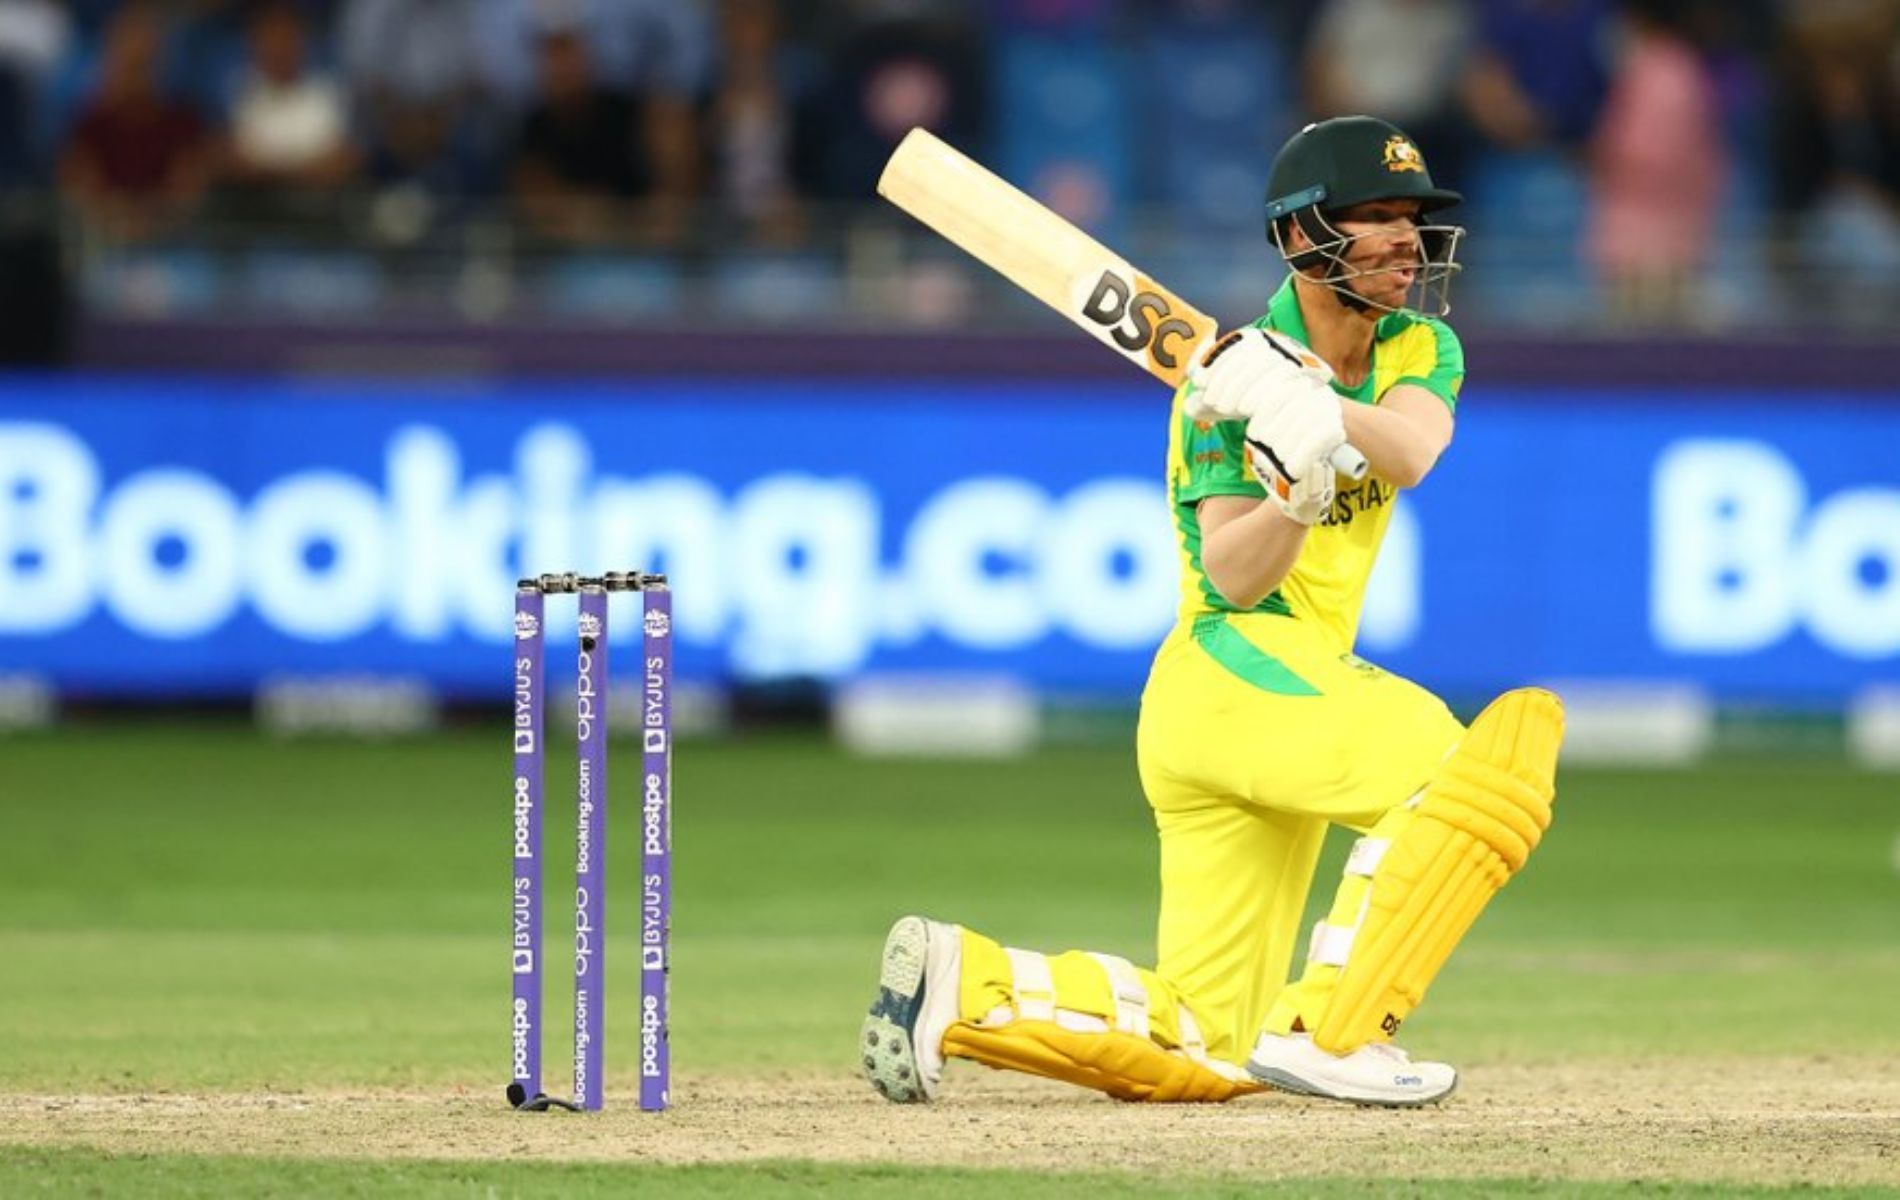 David Warner hit a half-century in the 2021 T20 World Cup final against New Zealand.